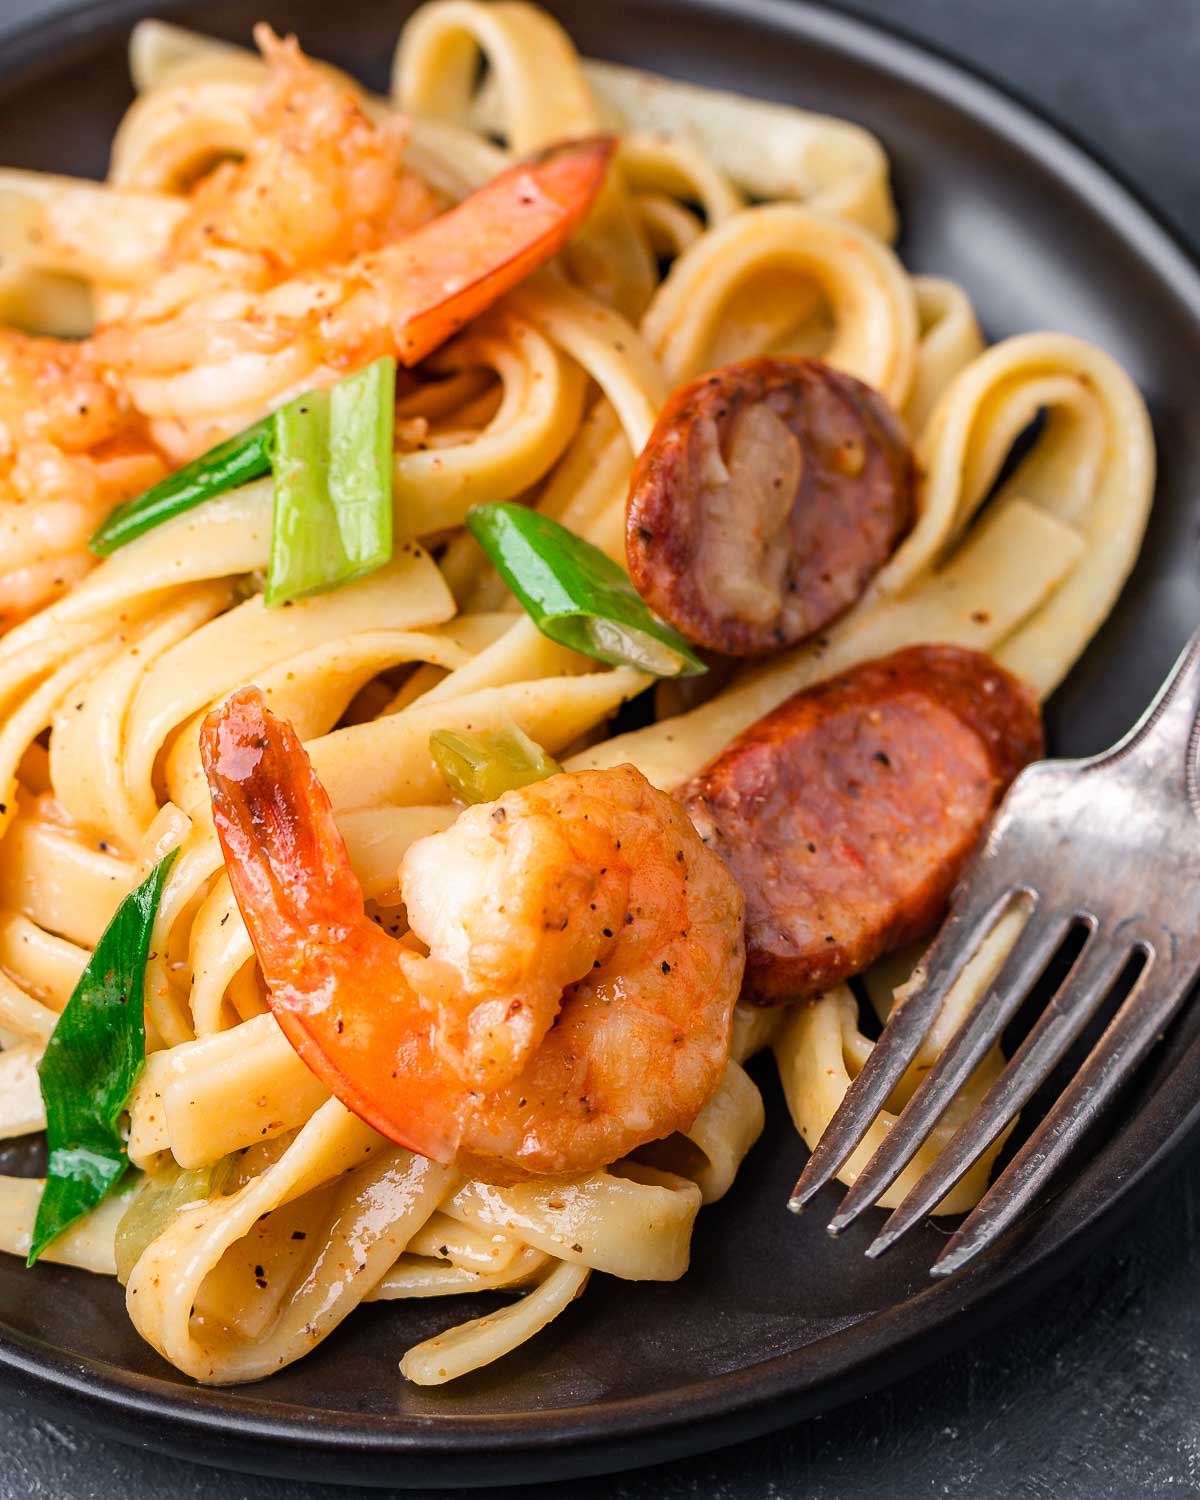 Cajun shrimp and sausage pasta in small plate with fork.